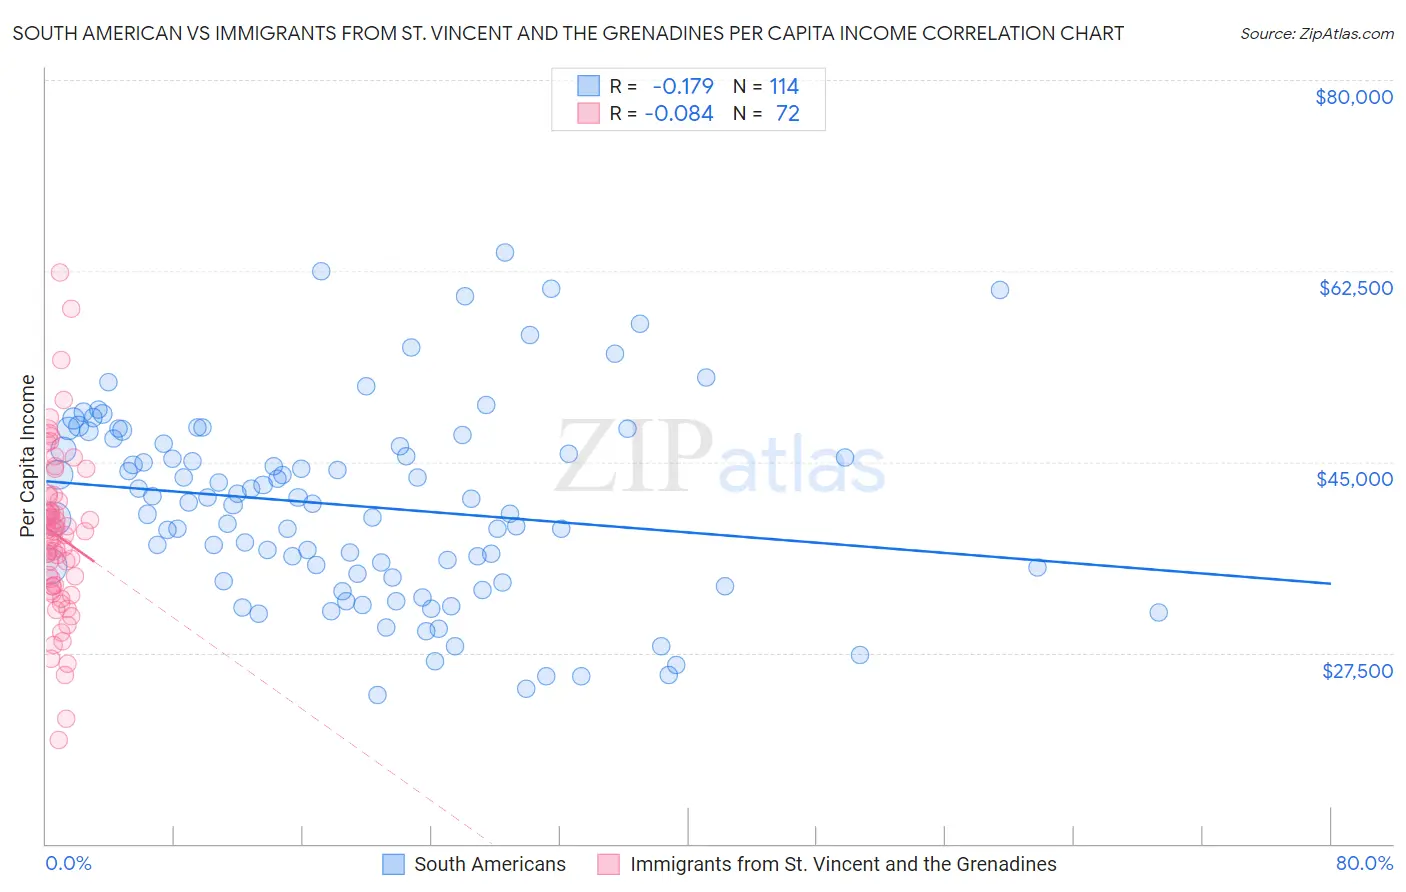 South American vs Immigrants from St. Vincent and the Grenadines Per Capita Income